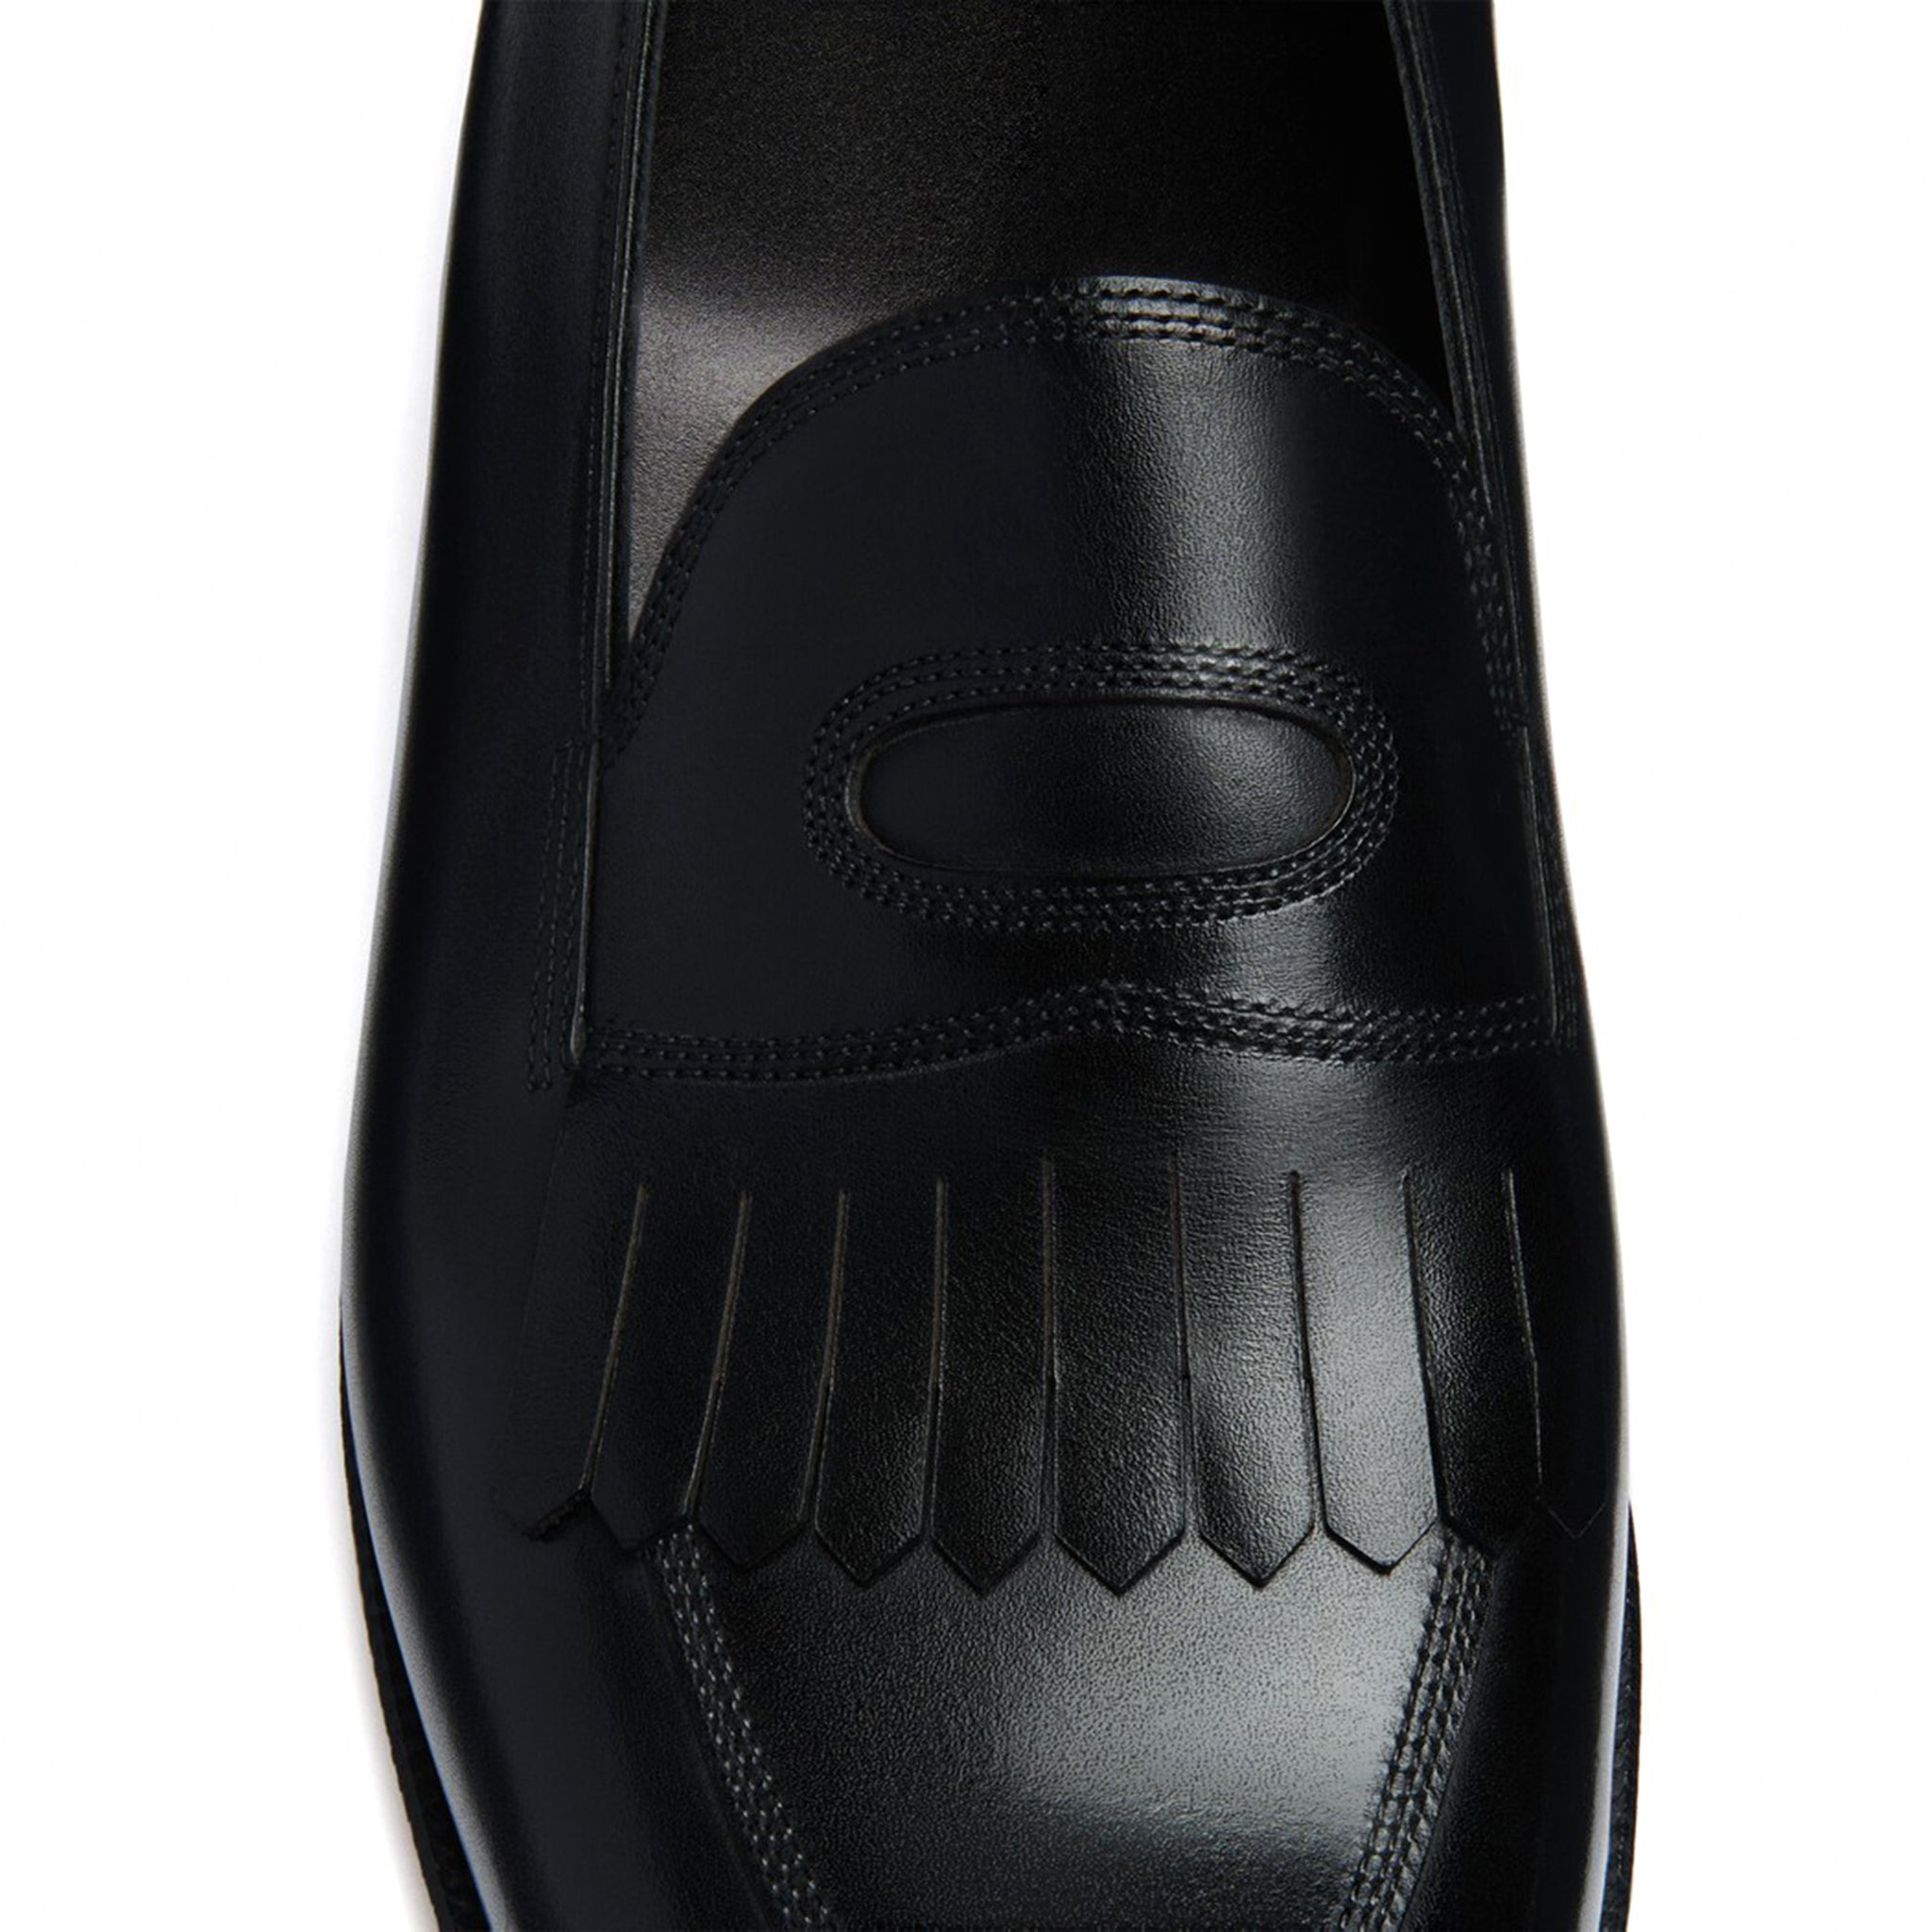 Men's Penny Loafers